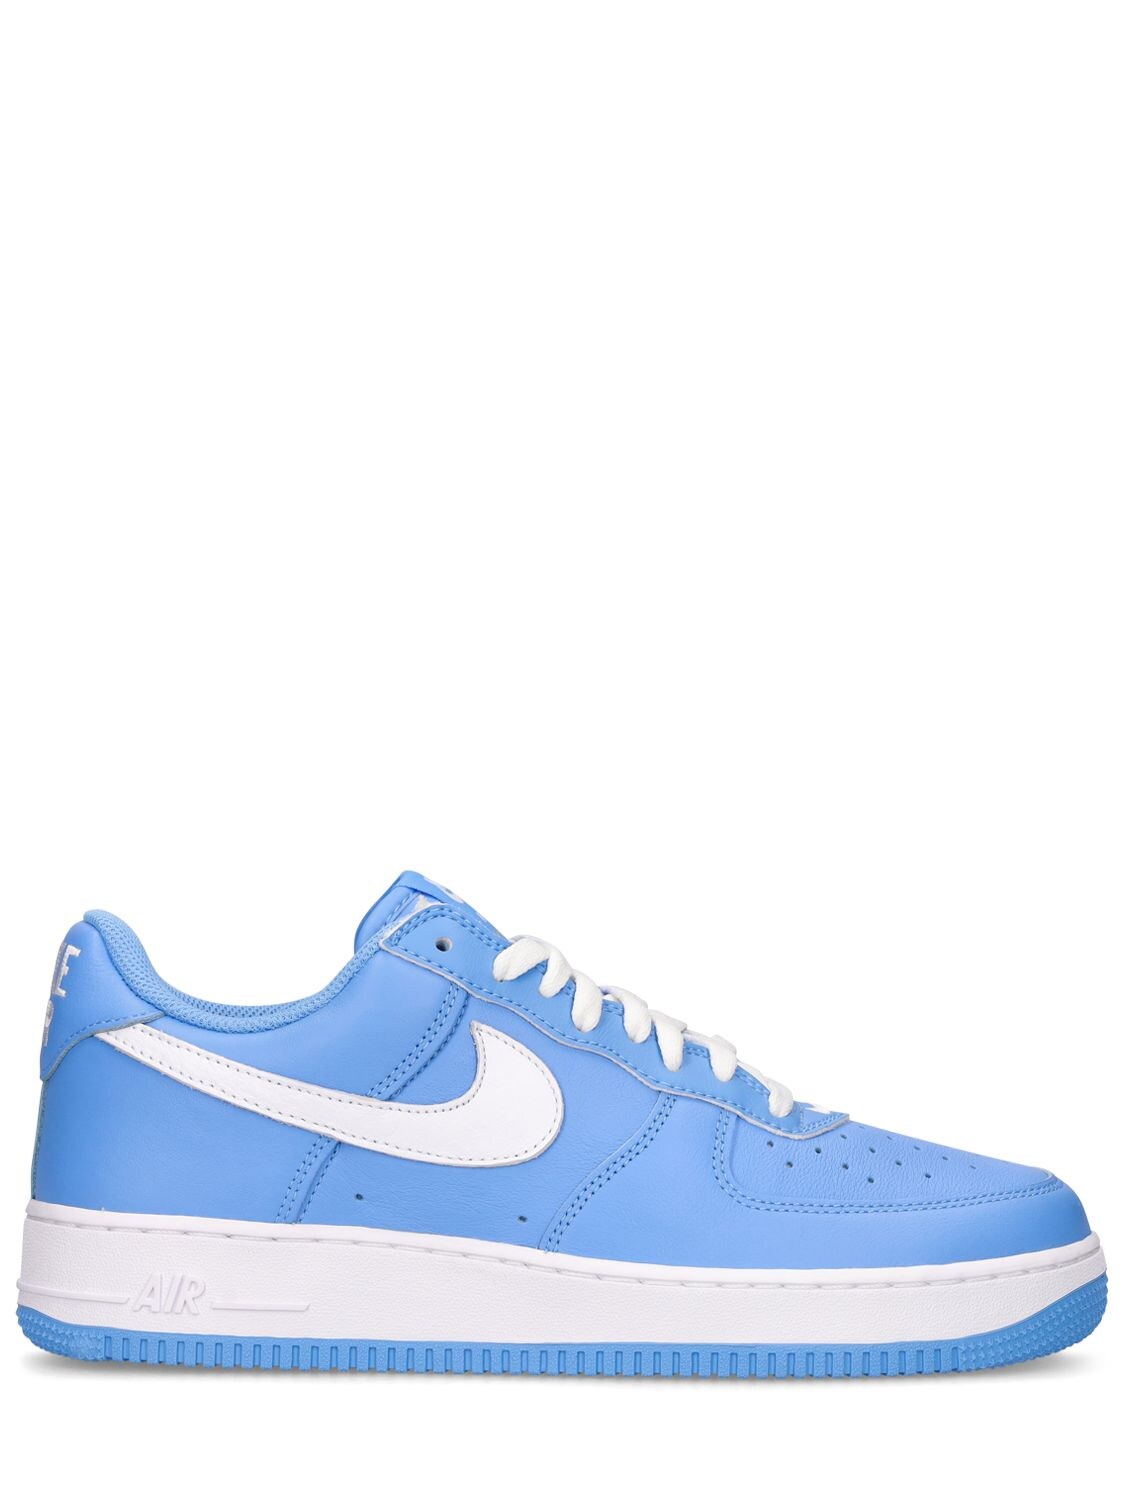 NIKE AIR FORCE 1 LOW RETRO trainers